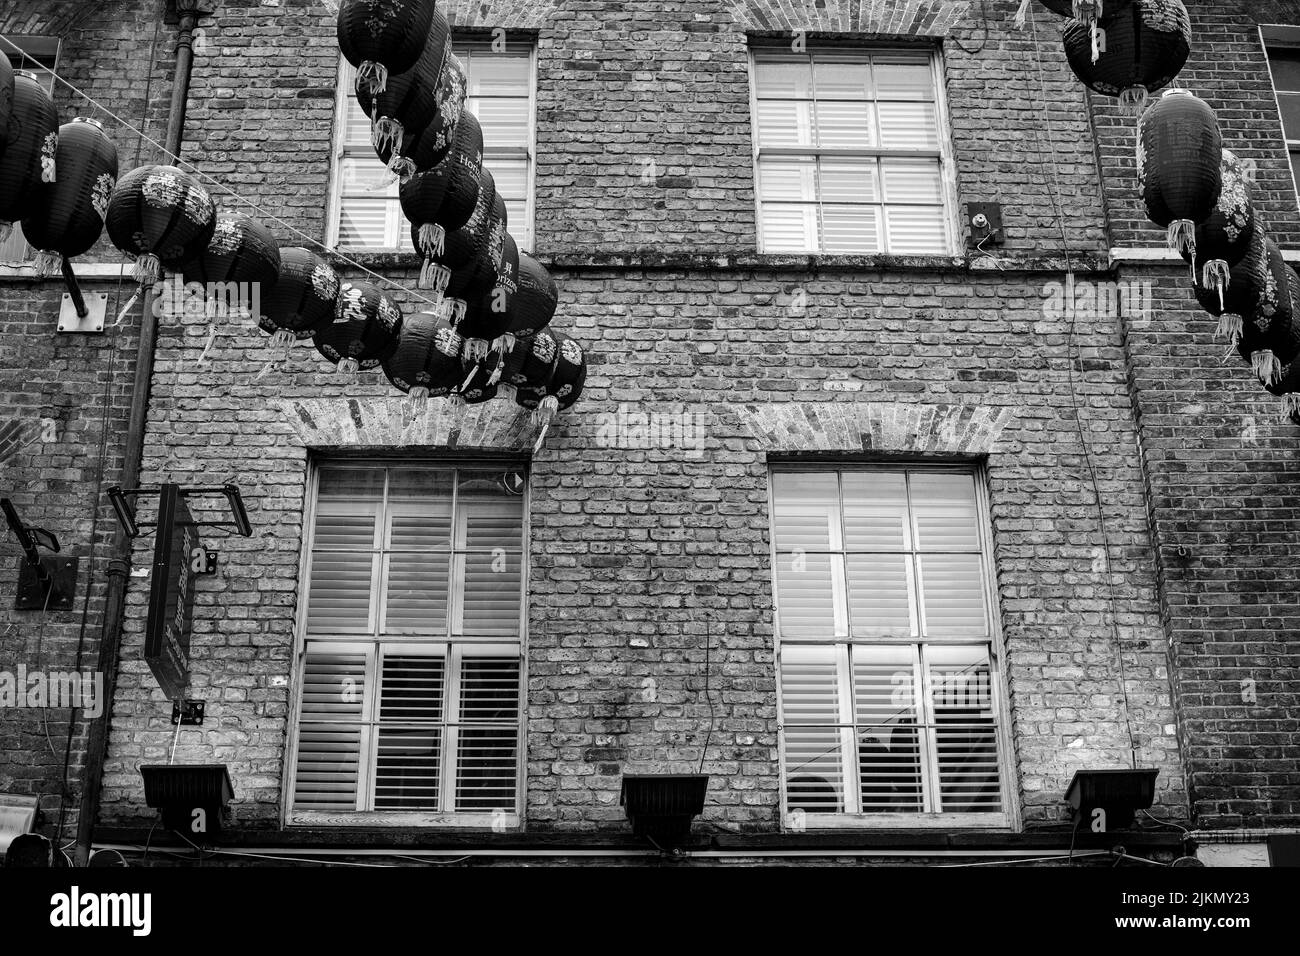 A grayscale low angle shot of China Town building with Lanterns and decorated hanging papers, London, UK Stock Photo